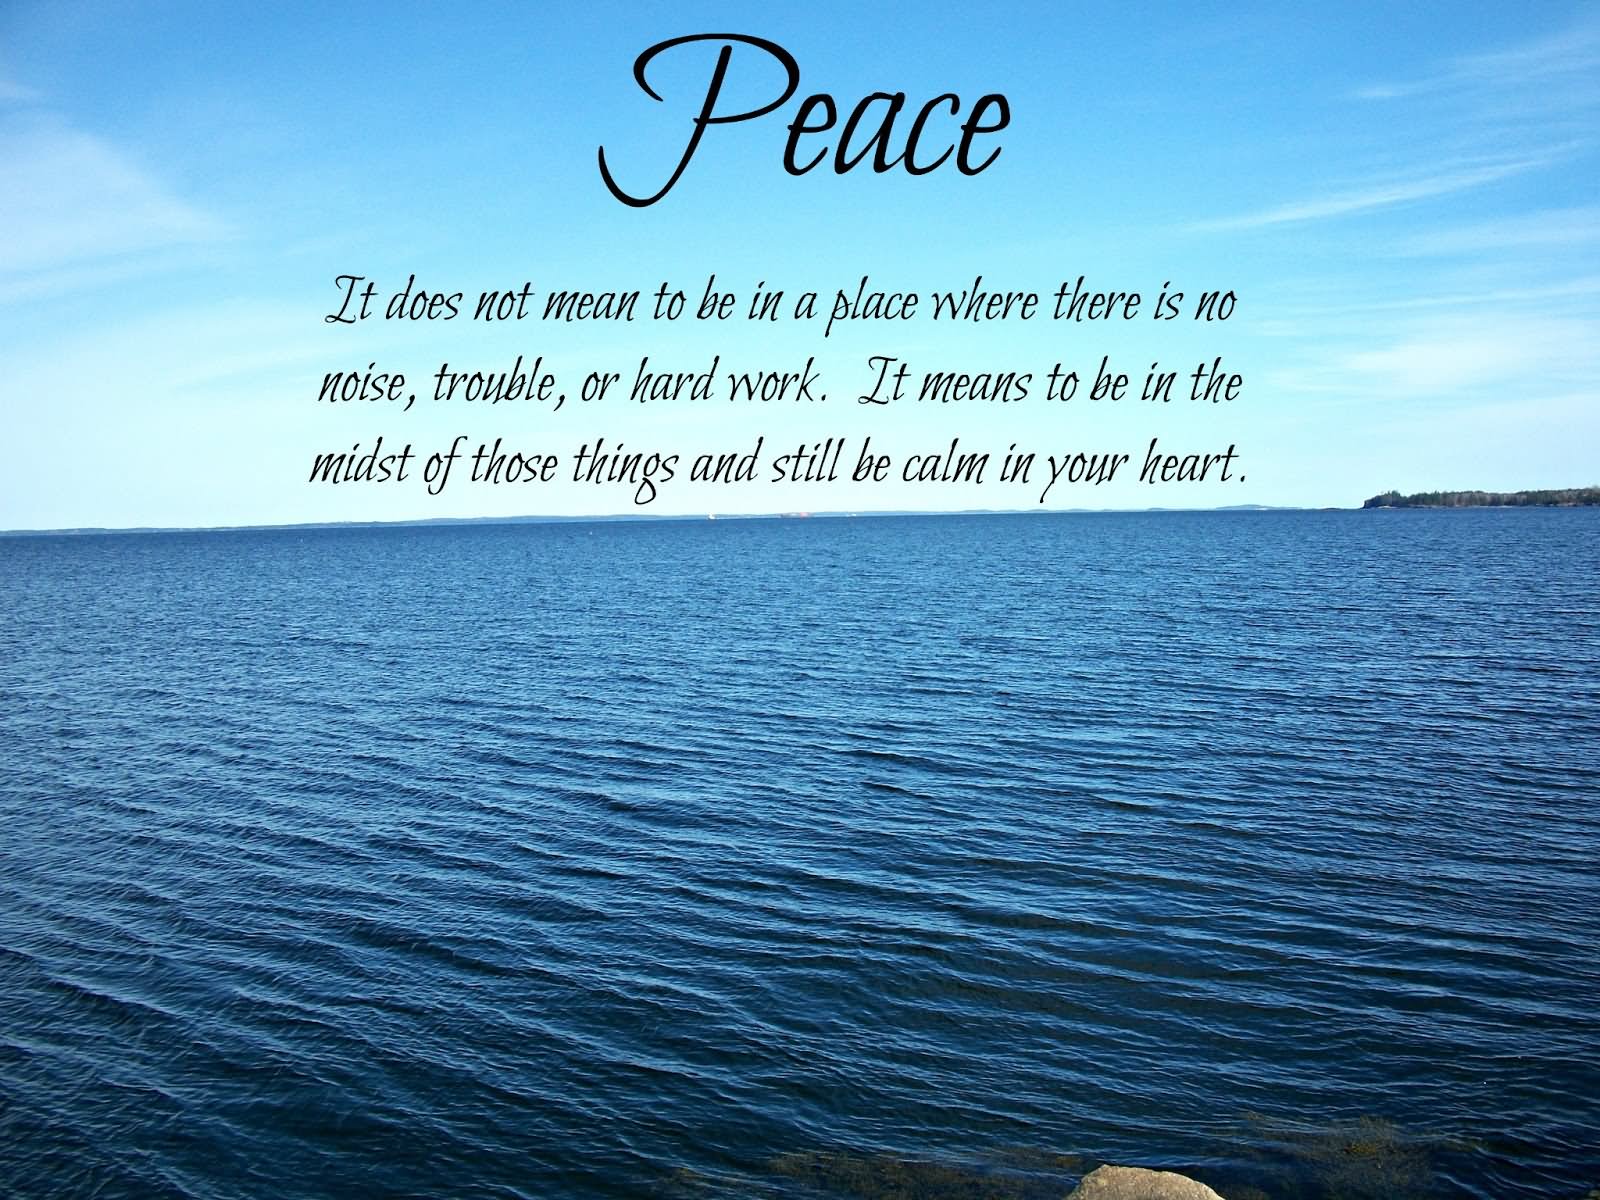 Peace. It does not mean to be in a place where there is no noise, trouble or hard work. It means to be in the midst of those things and still be calm in your heart. (2)